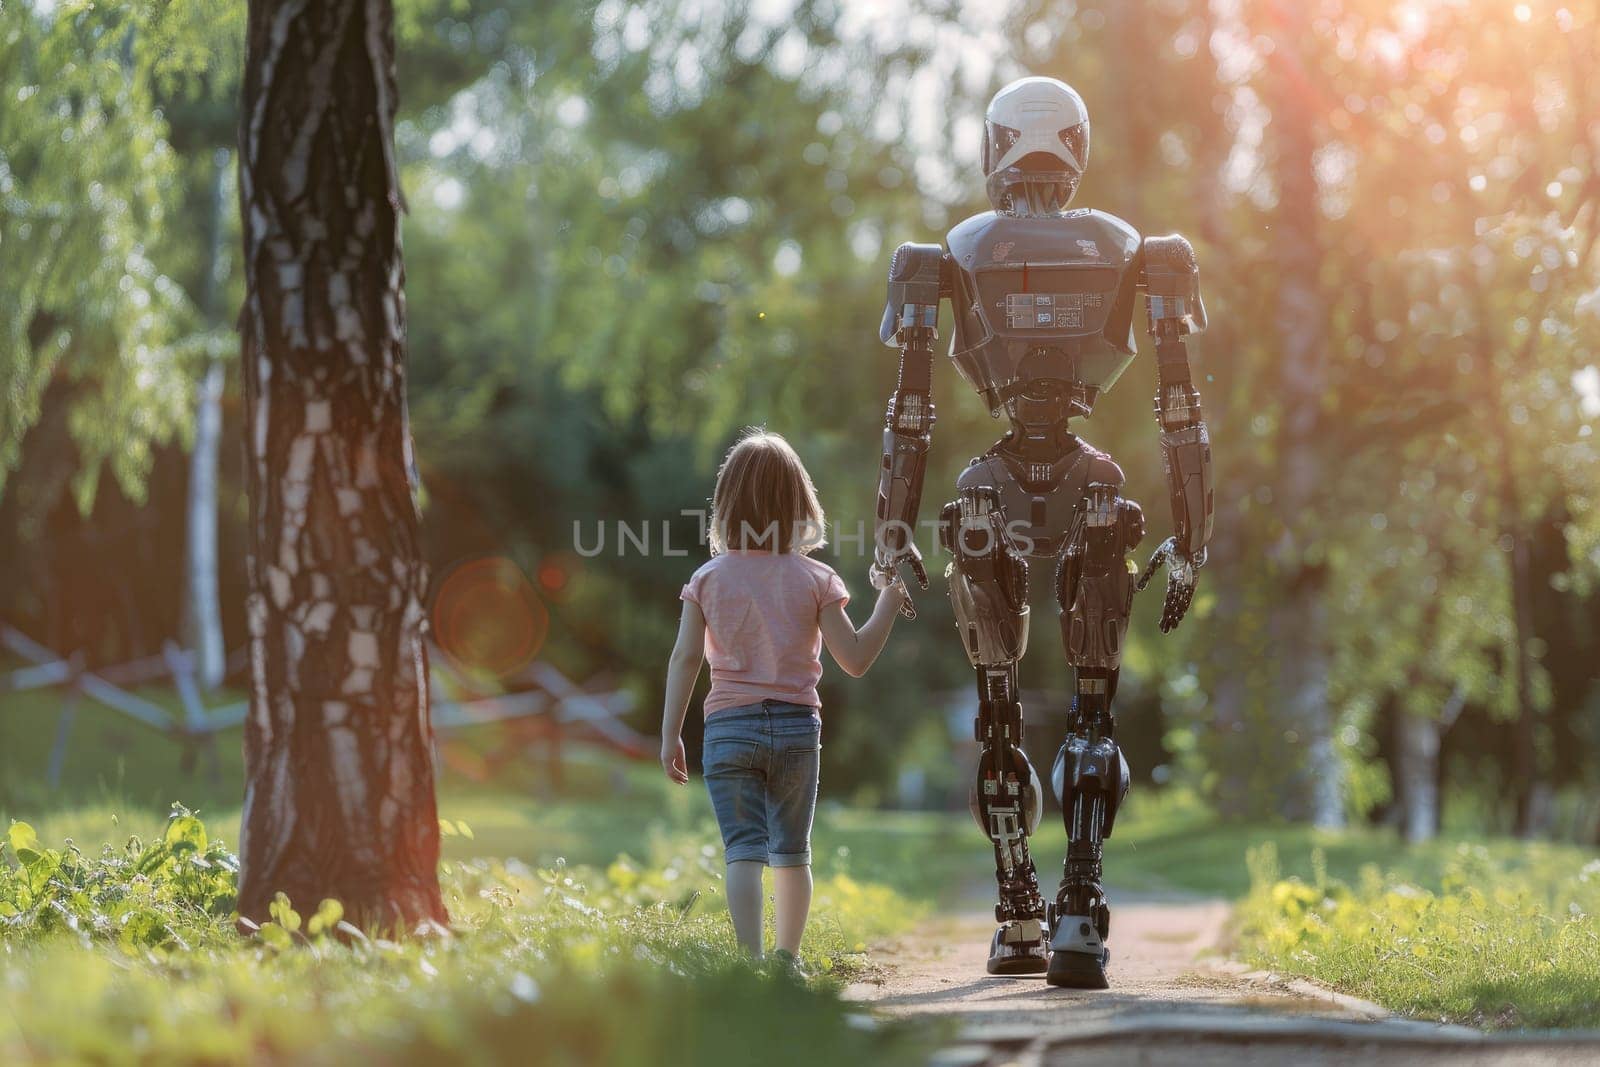 Humanoid robot on a walk with children, Futuristic family and friend concept, Generative AI.